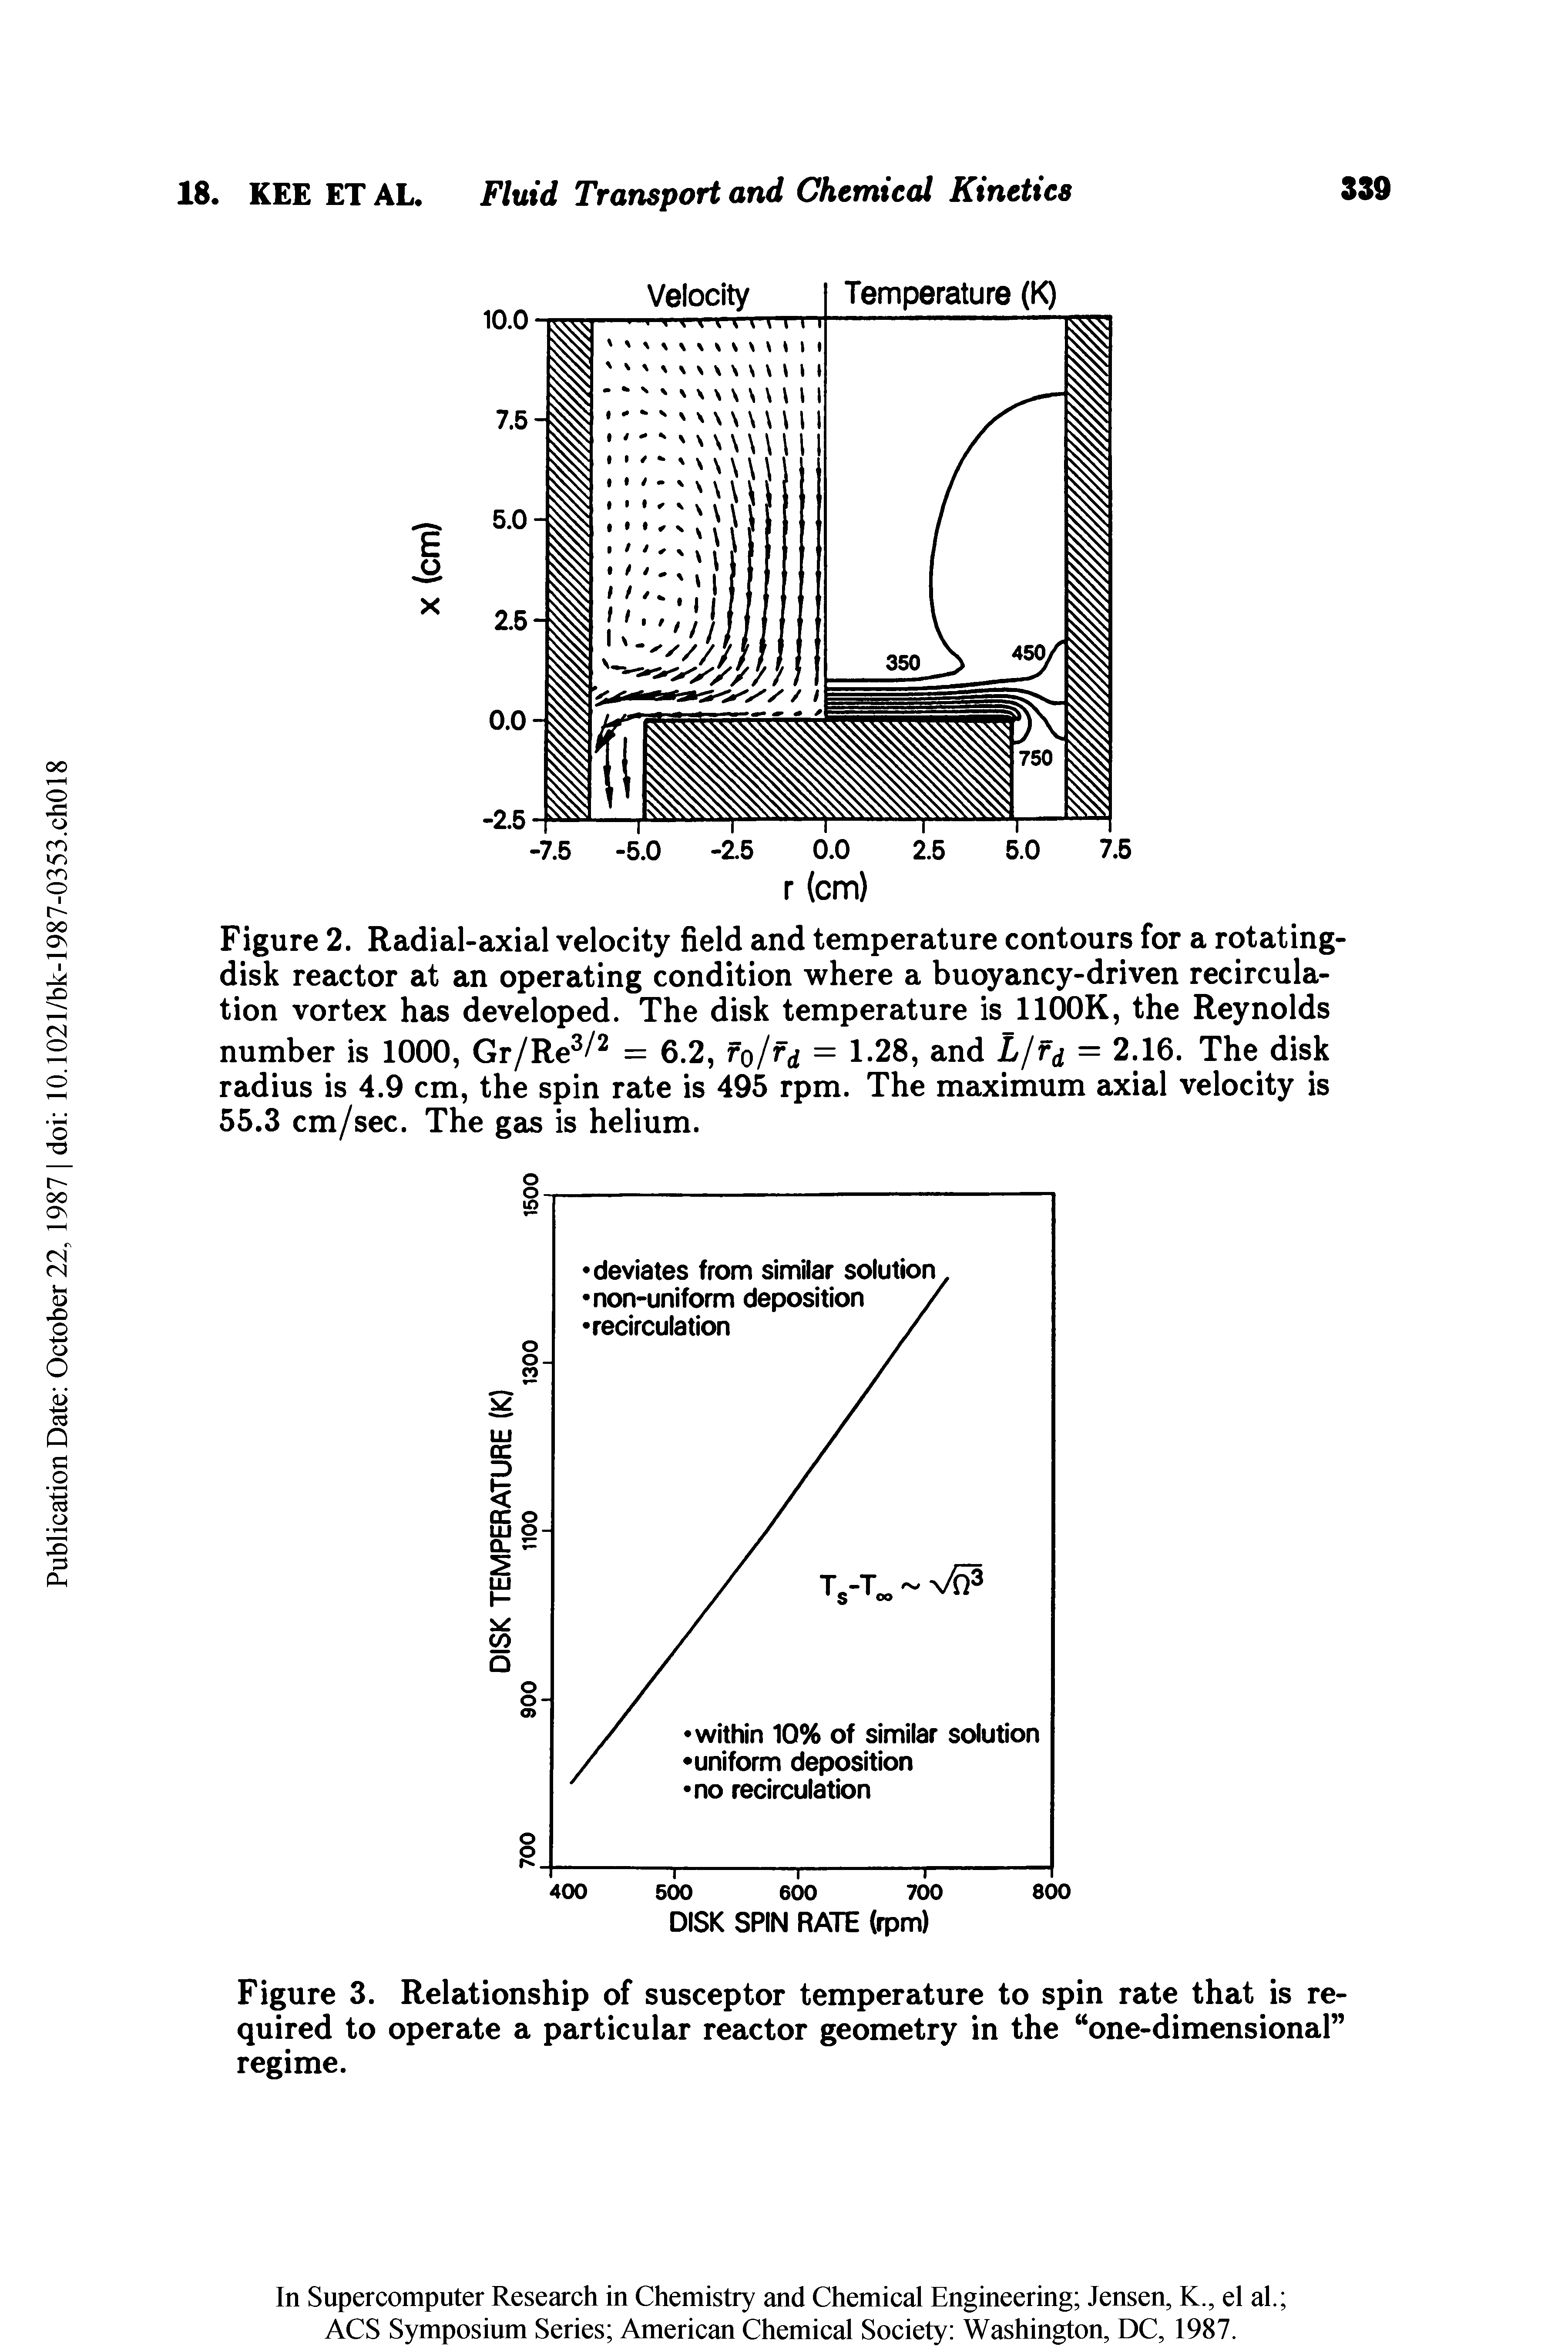 Figure 3. Relationship of susceptor temperature to spin rate that is required to operate a particular reactor geometry in the one-dimensional regime.